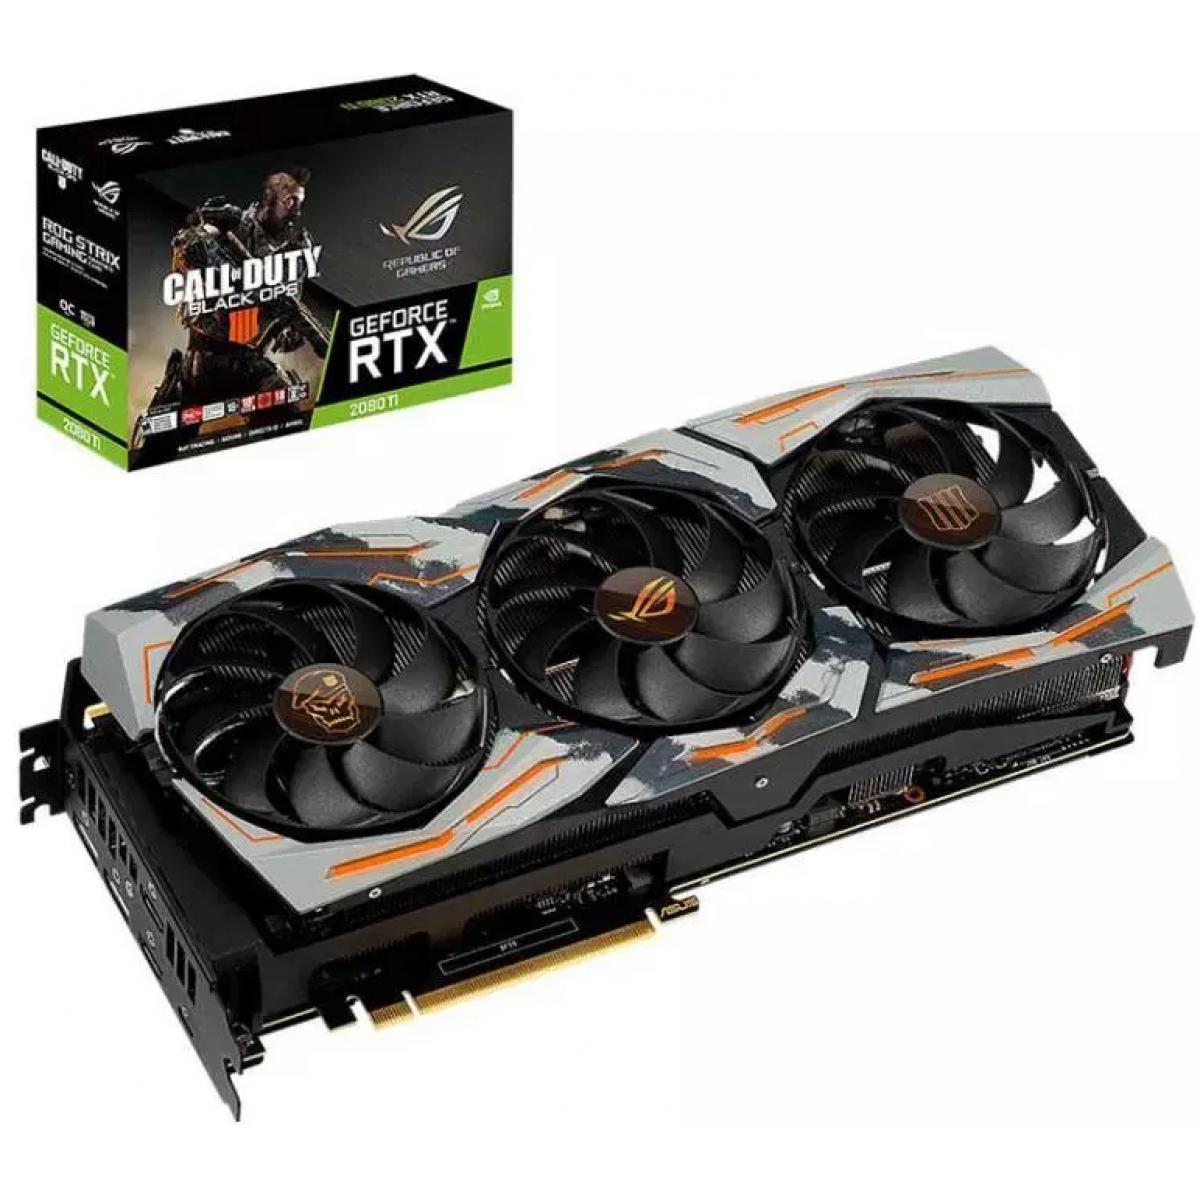 Asus Strix Rtx 2080 Ti Edition Limitée Call Of Duty Black Ops Cod Bo4